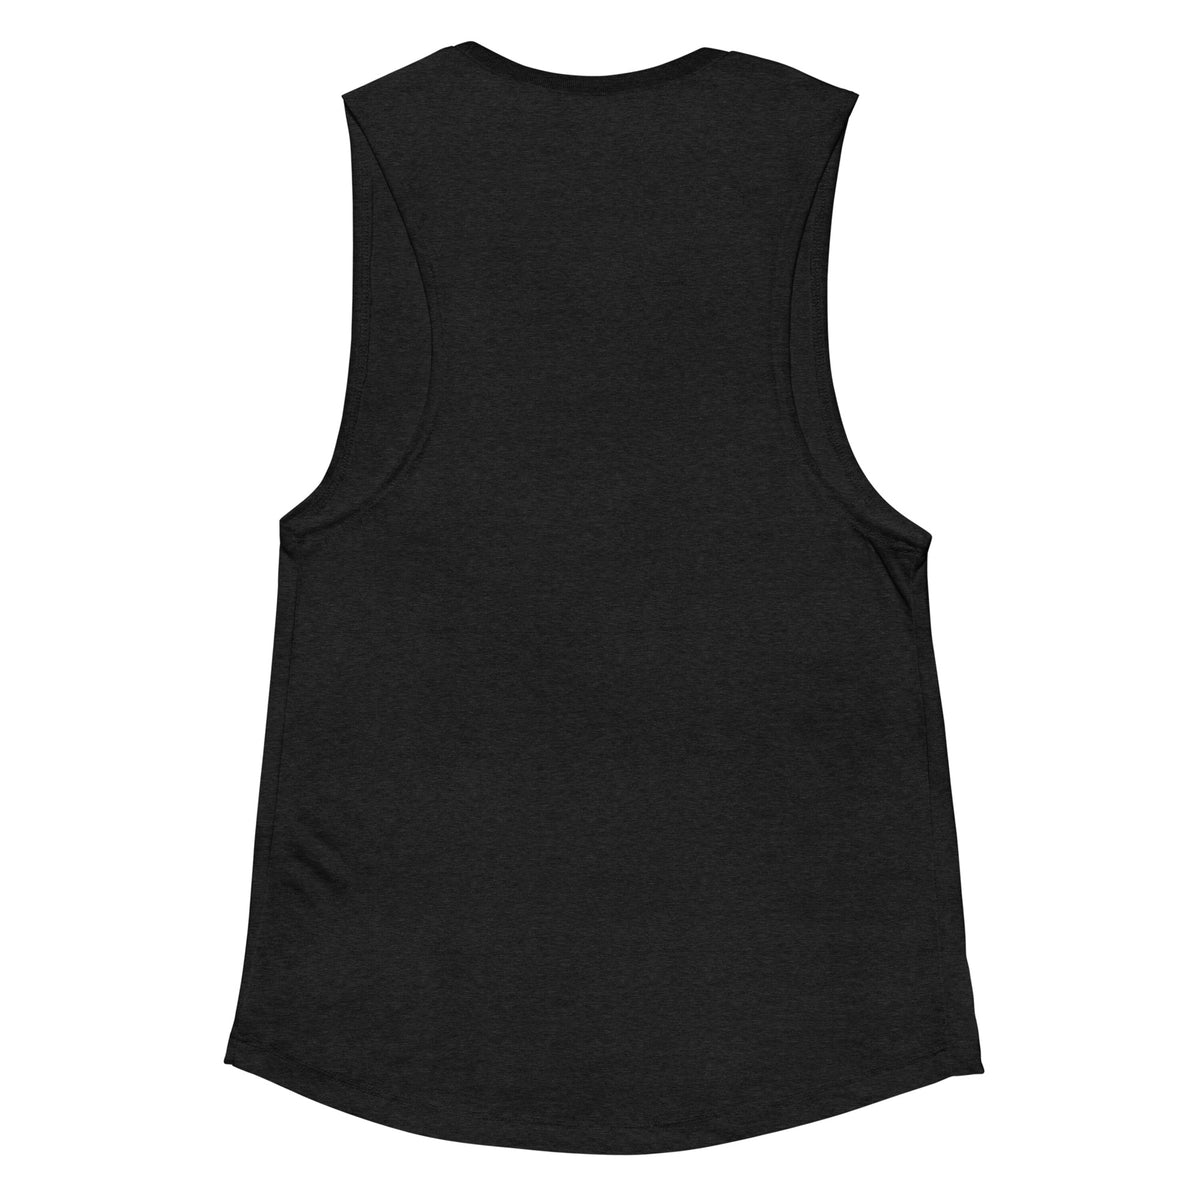 I Support Affirmative Action Women's Muscle Tank